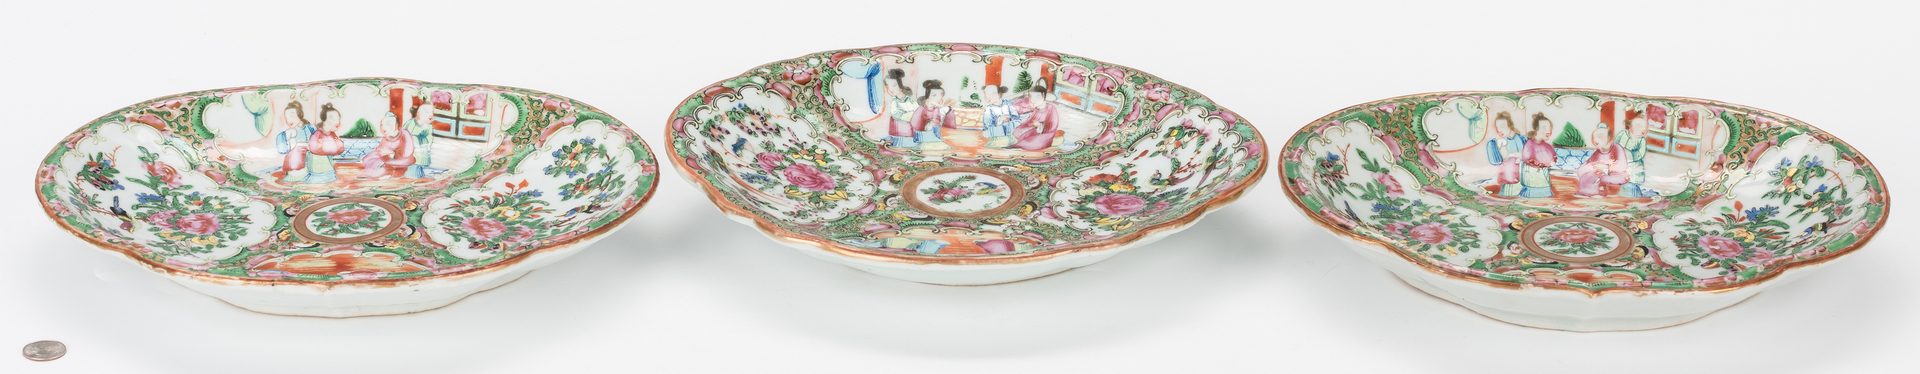 Lot 355: 3 Chinese Rose Medallion Porcelain Dishes, Oval shapes